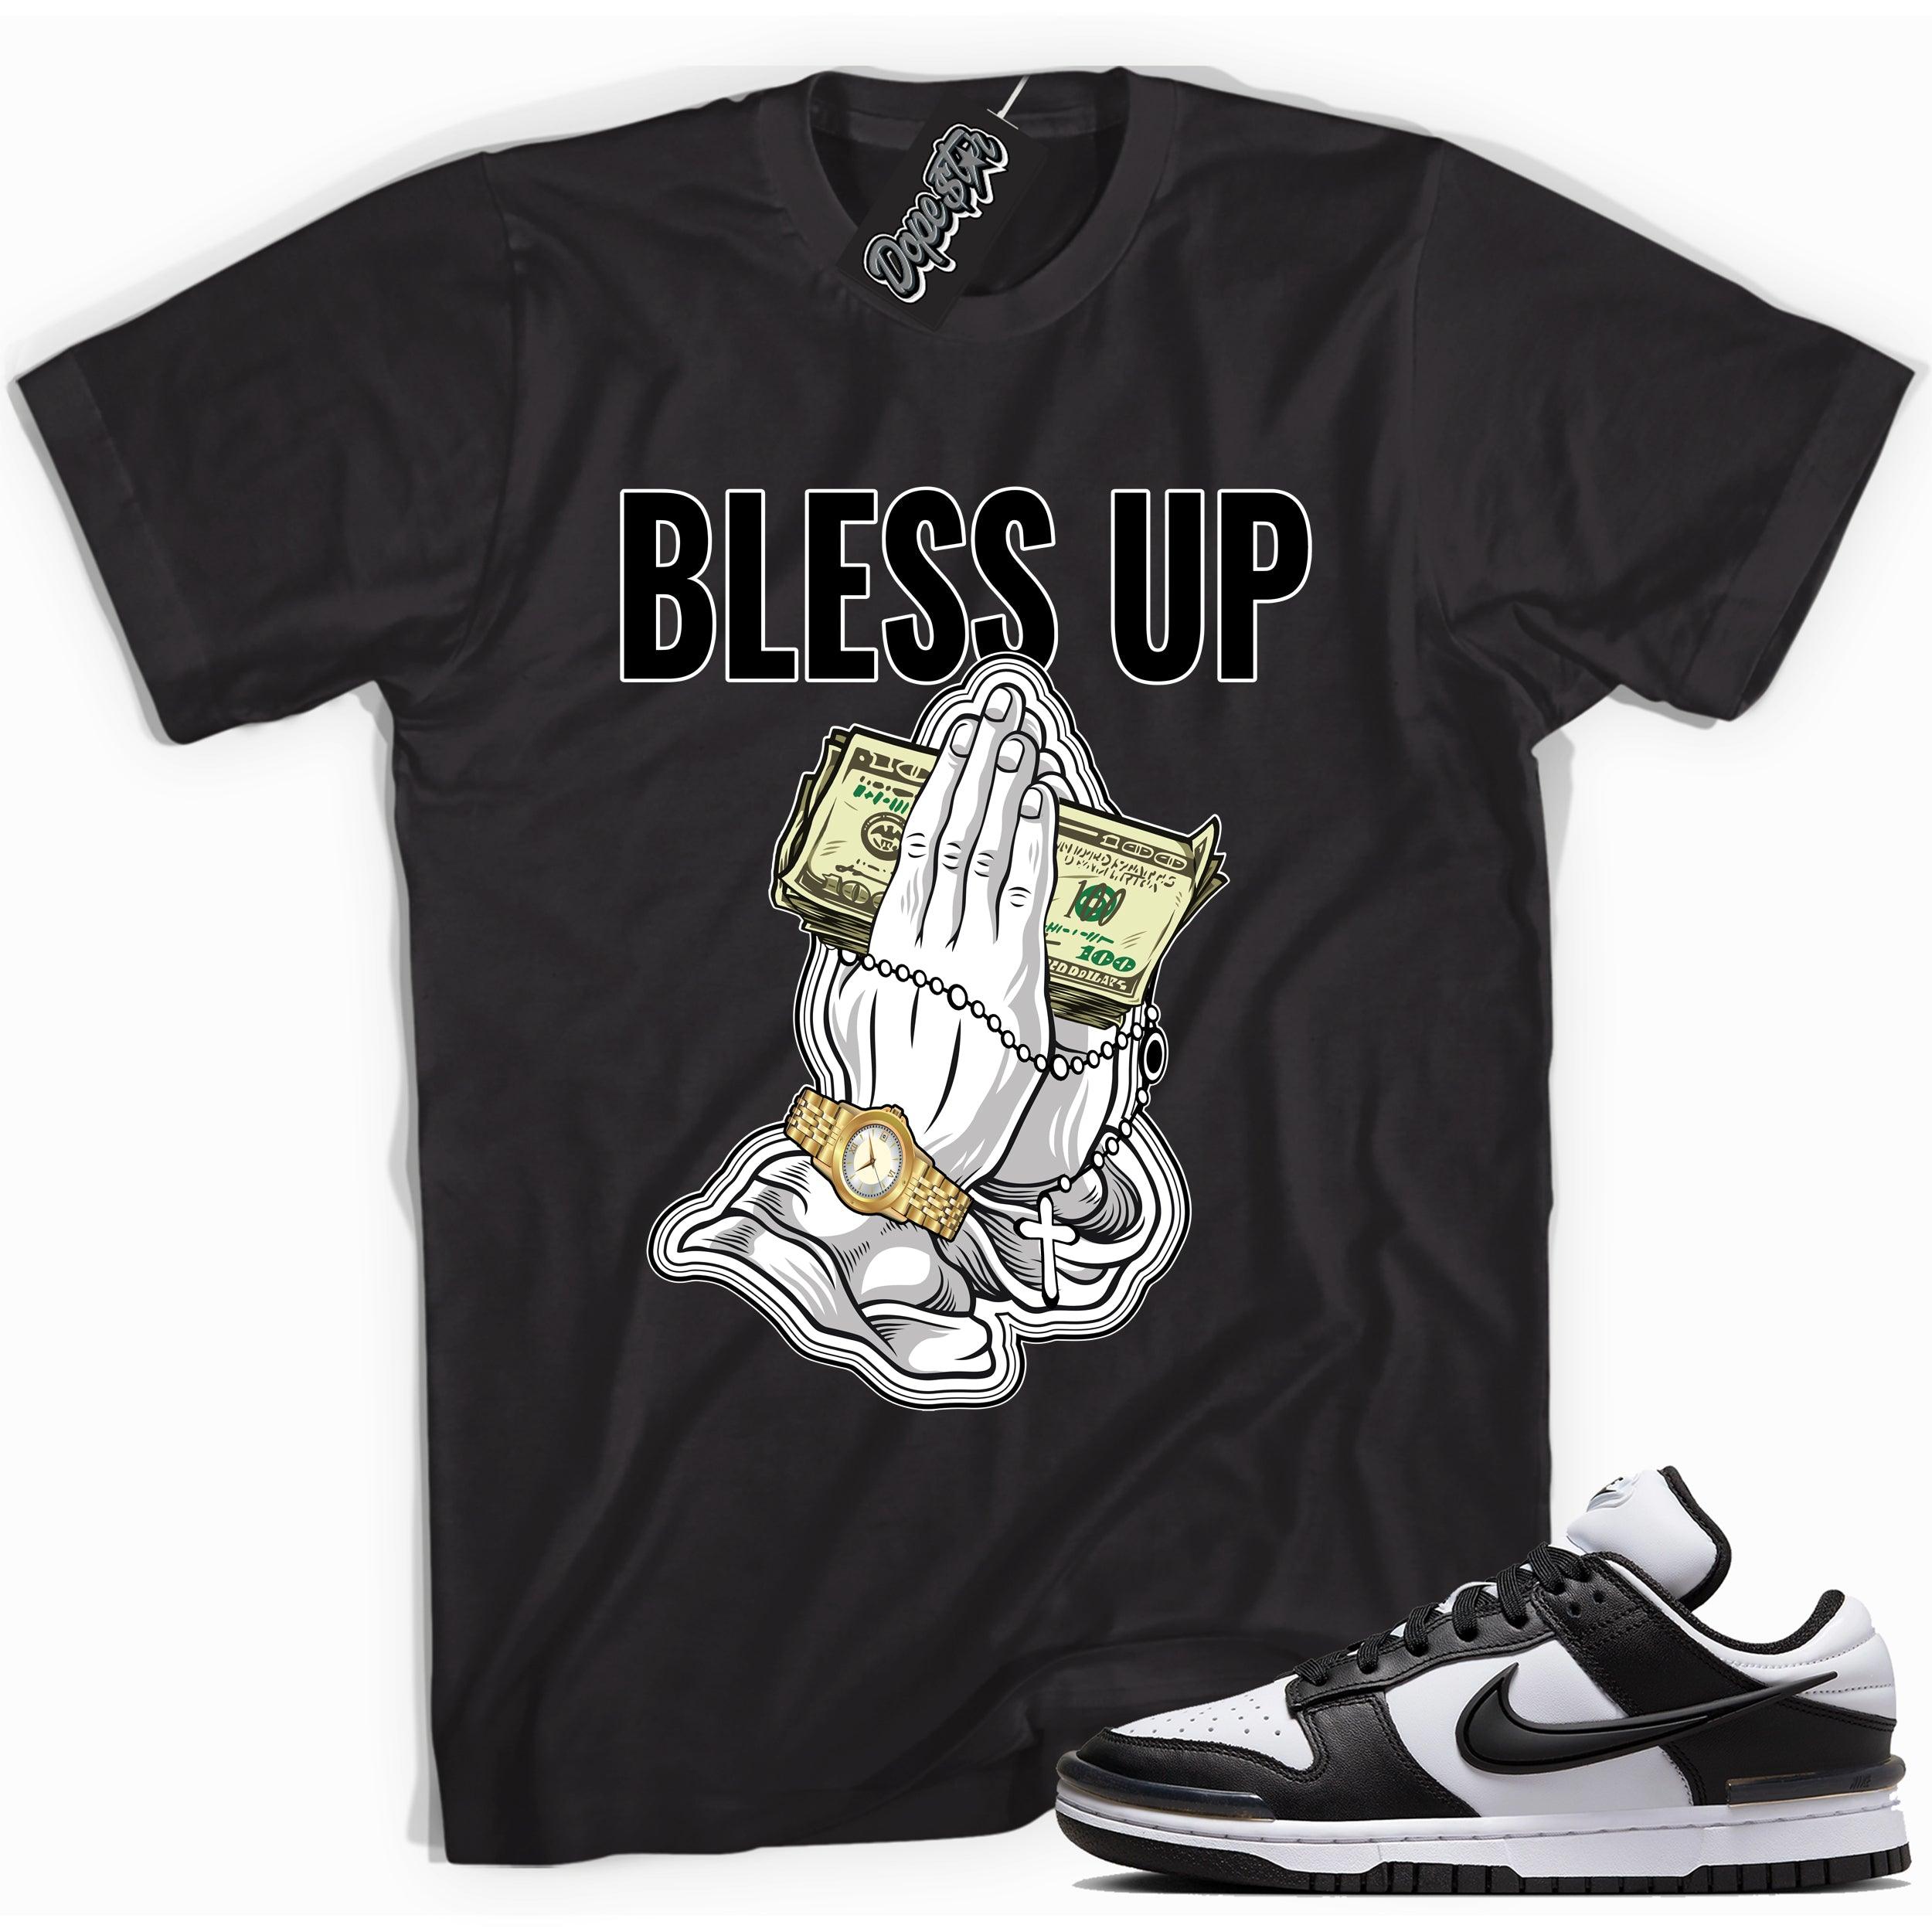 Cool black graphic tee with 'bless up' print, that perfectly matches Nike Dunk Low Twist Panda sneakers.